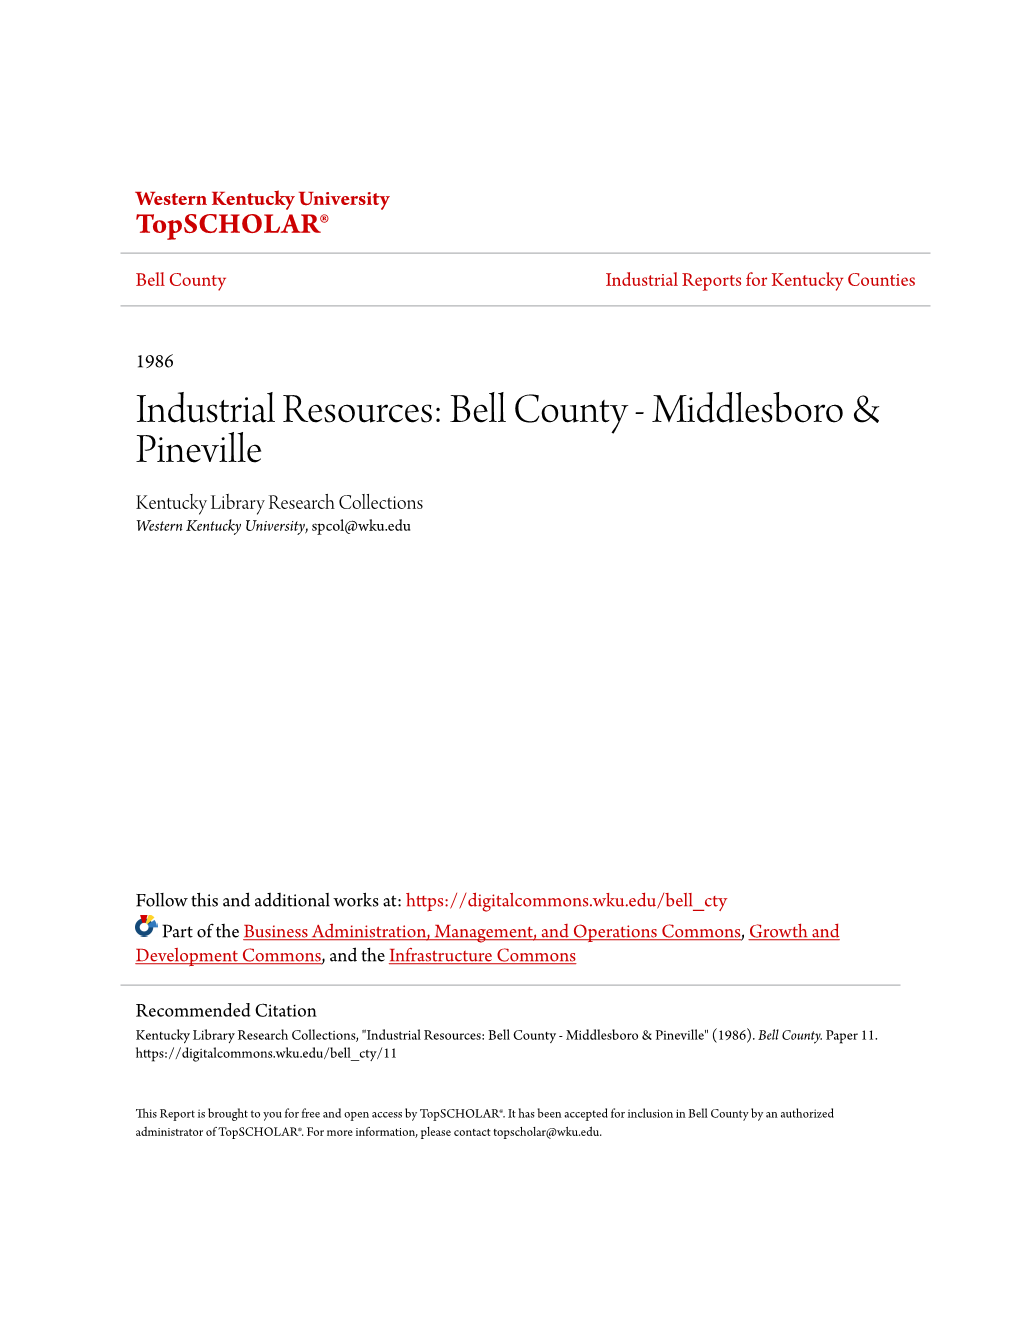 Bell County Industrial Reports for Kentucky Counties